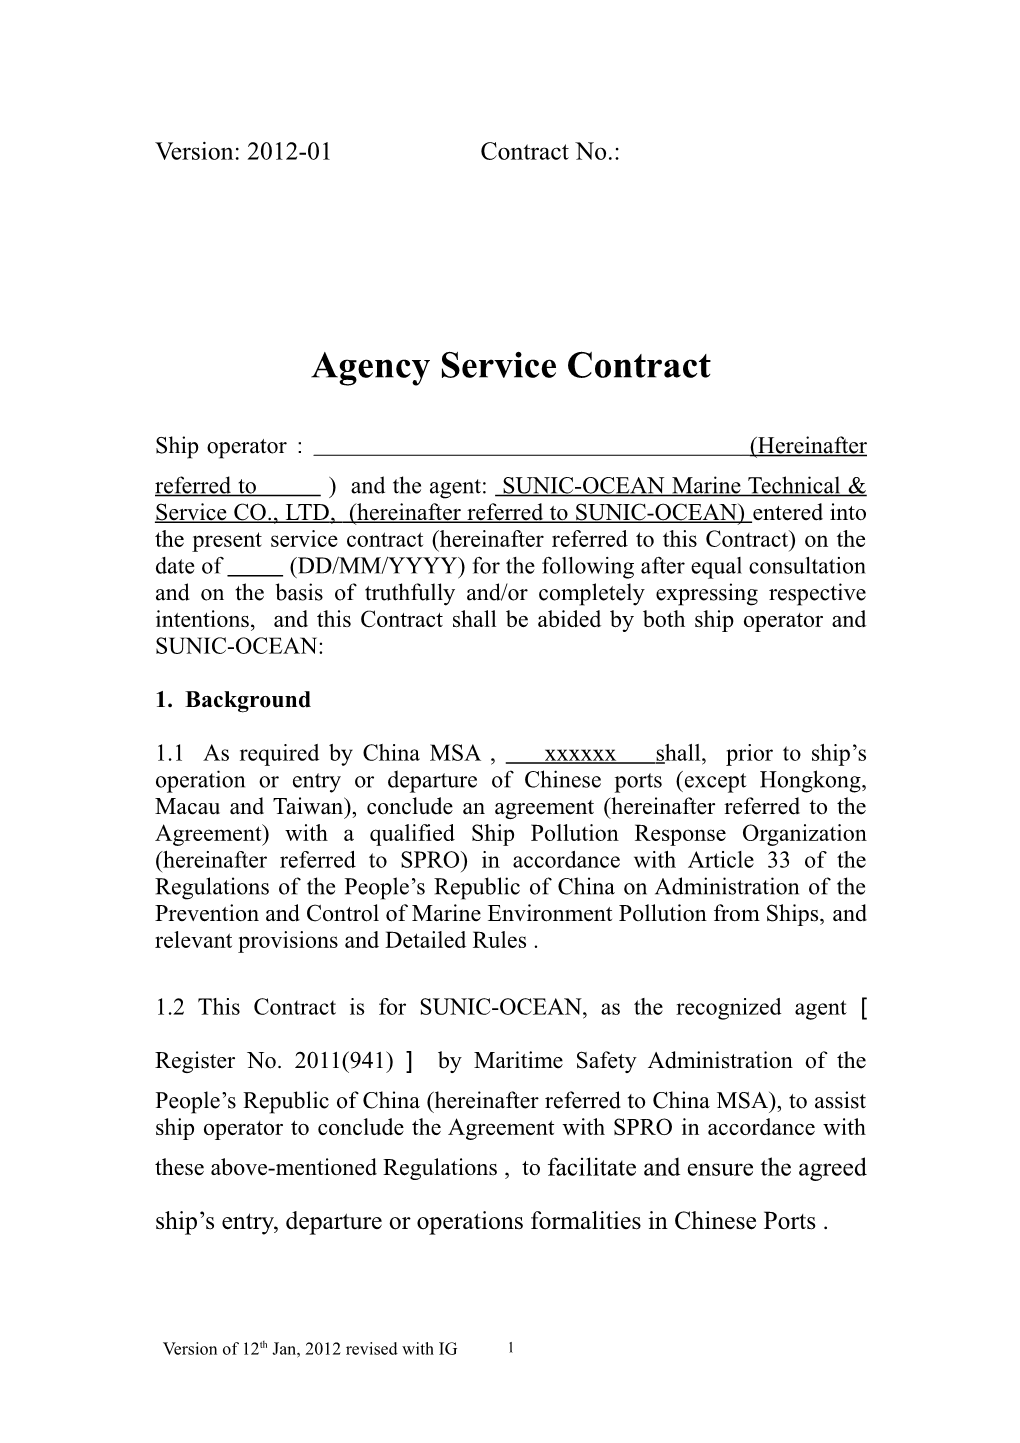 Agency Service Contract